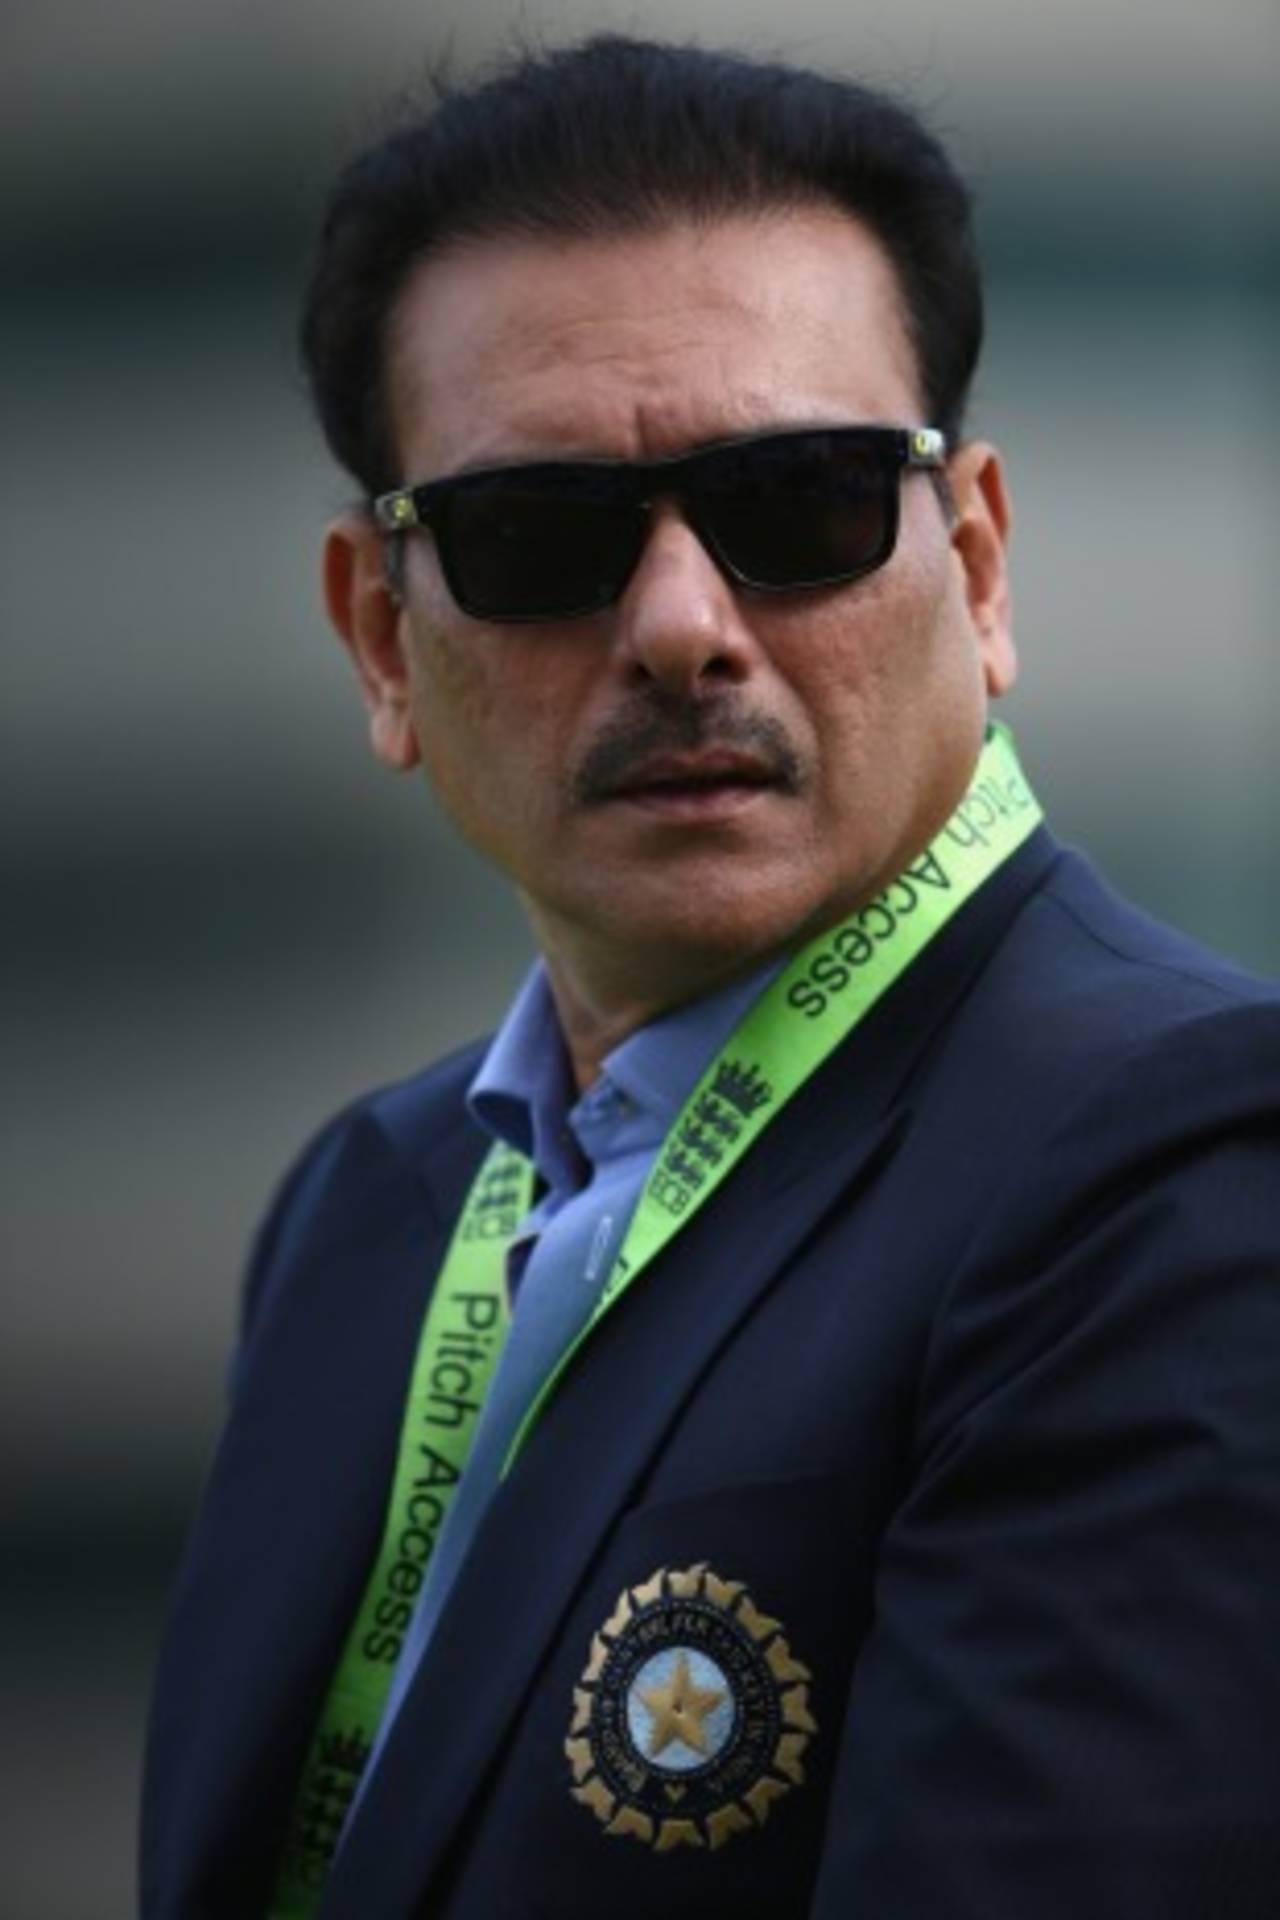 Ravi Shastri on the field ahead of the start of play, England v India, 3rd ODI, Trent Bridge, August 30, 2014